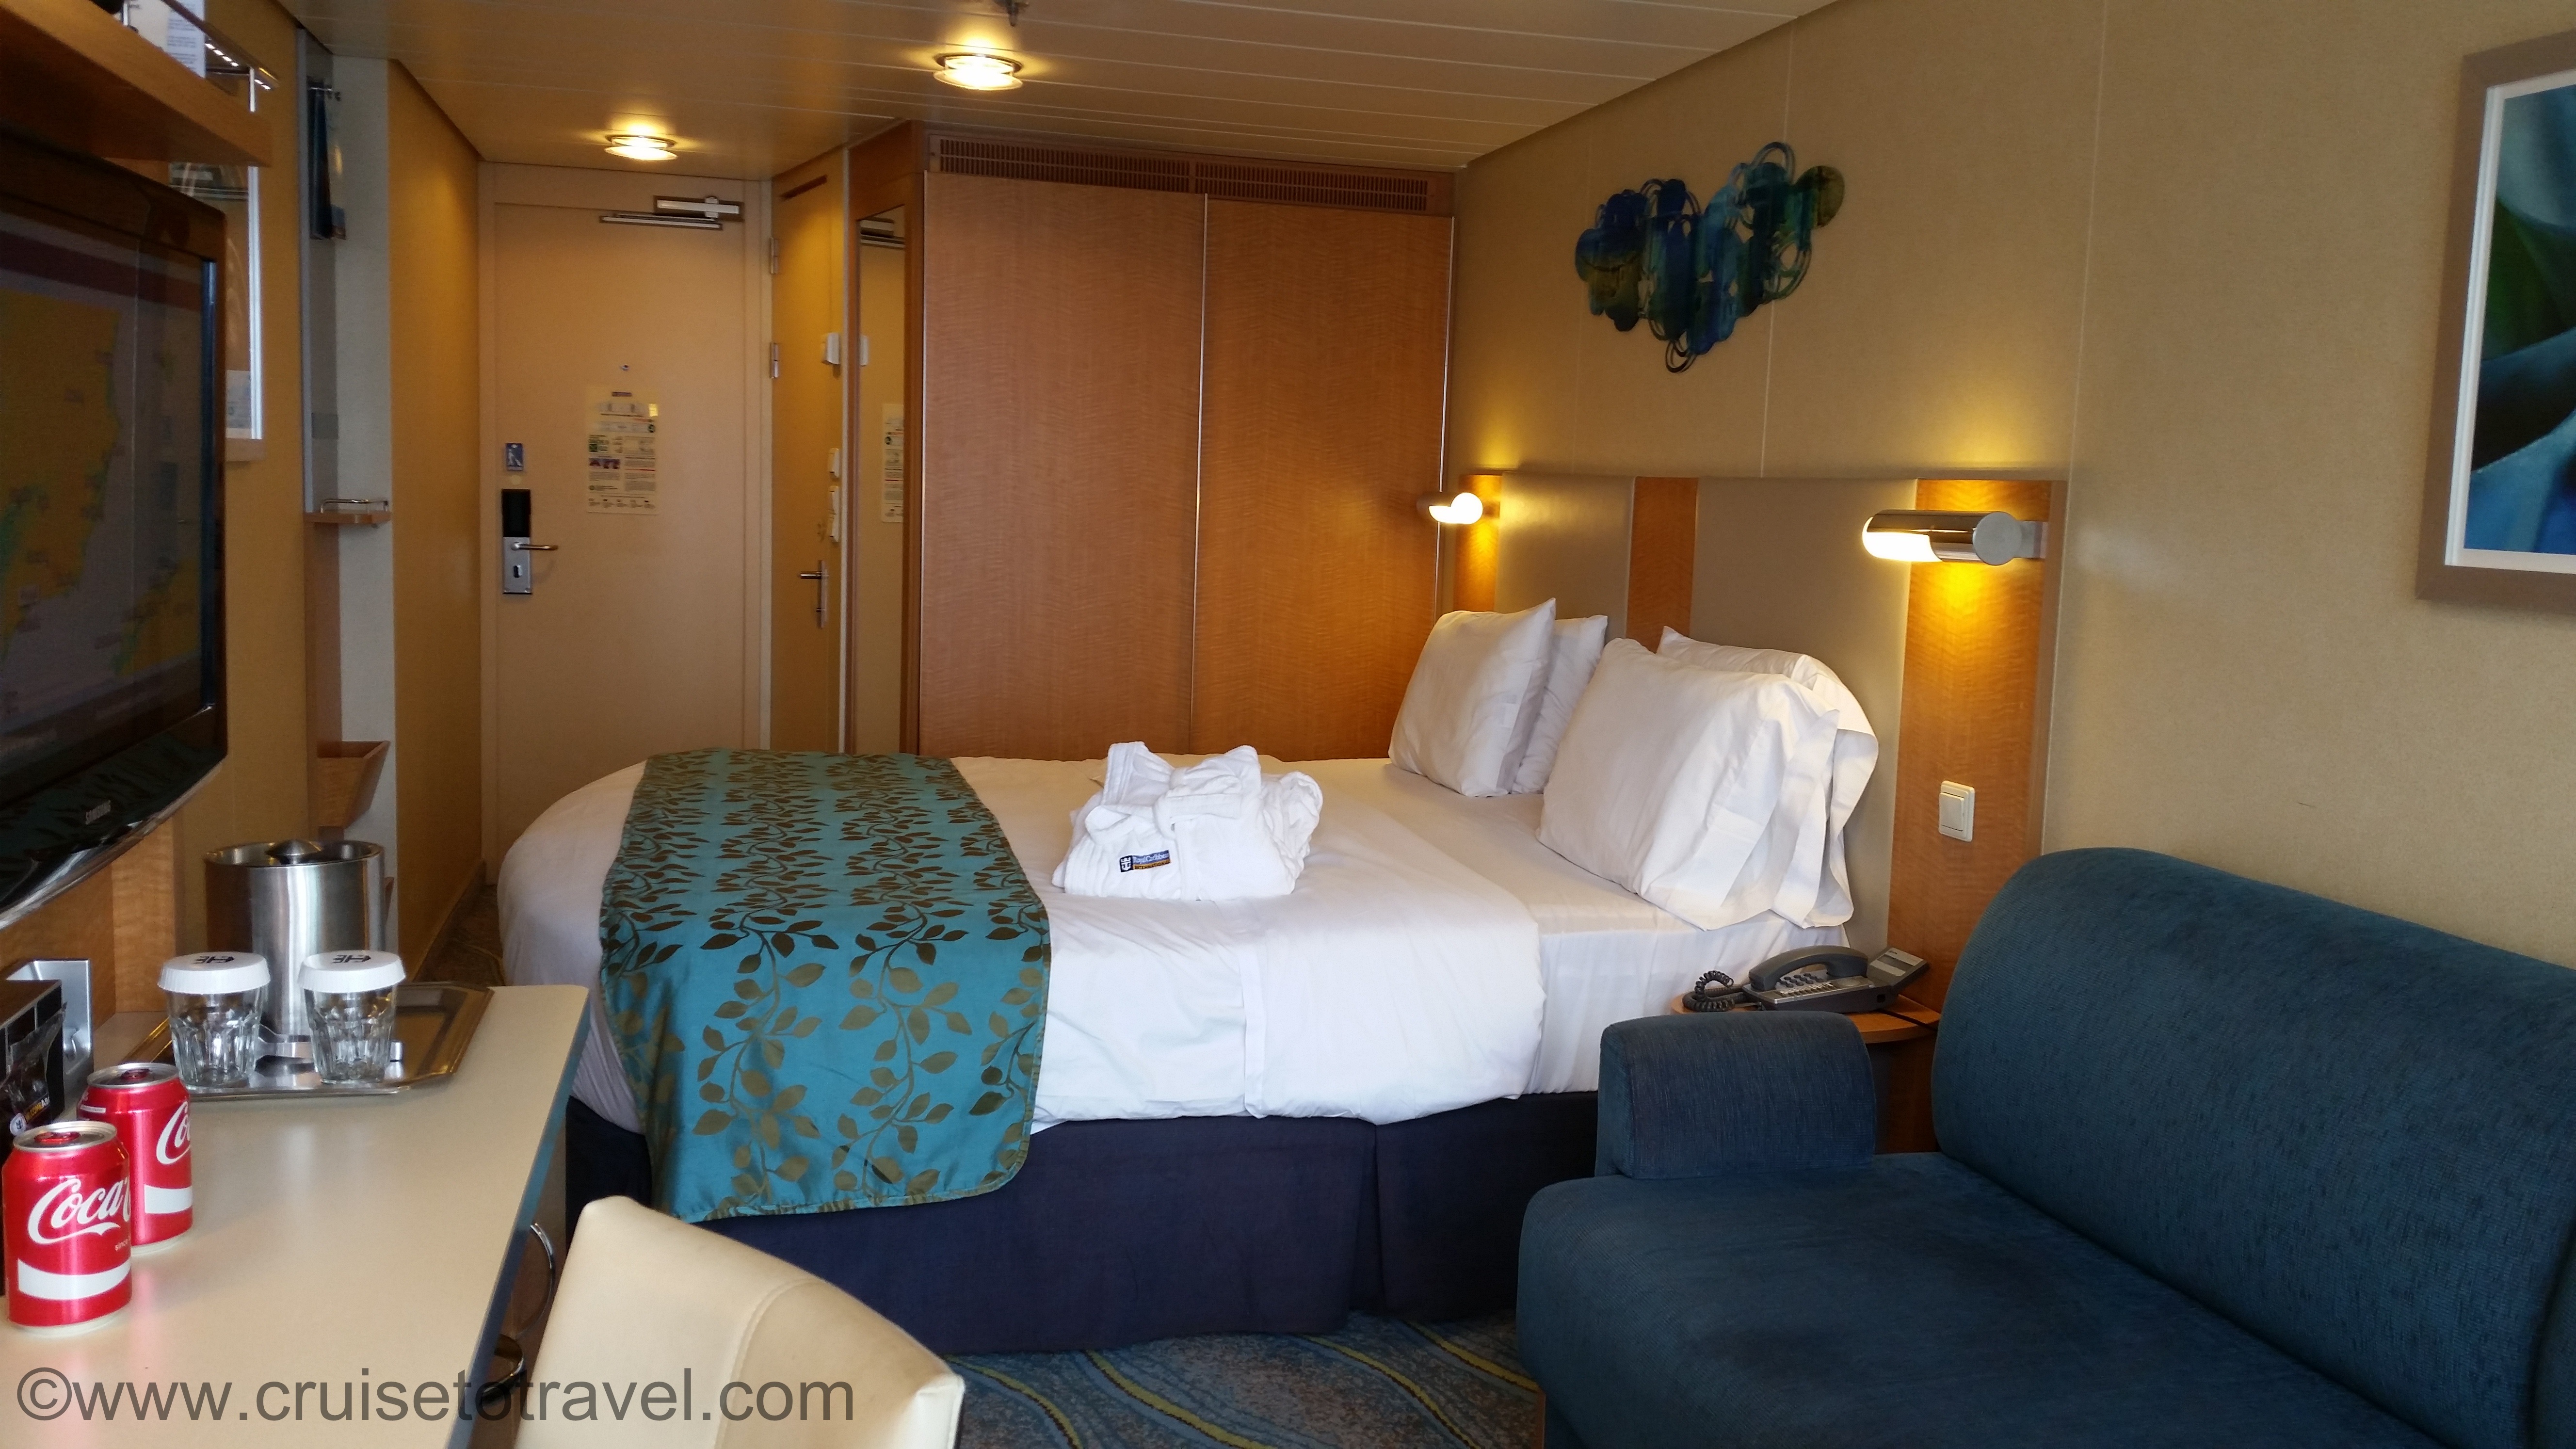 Cabin crawl Allure of the Seas October 2015 CRUISE TO